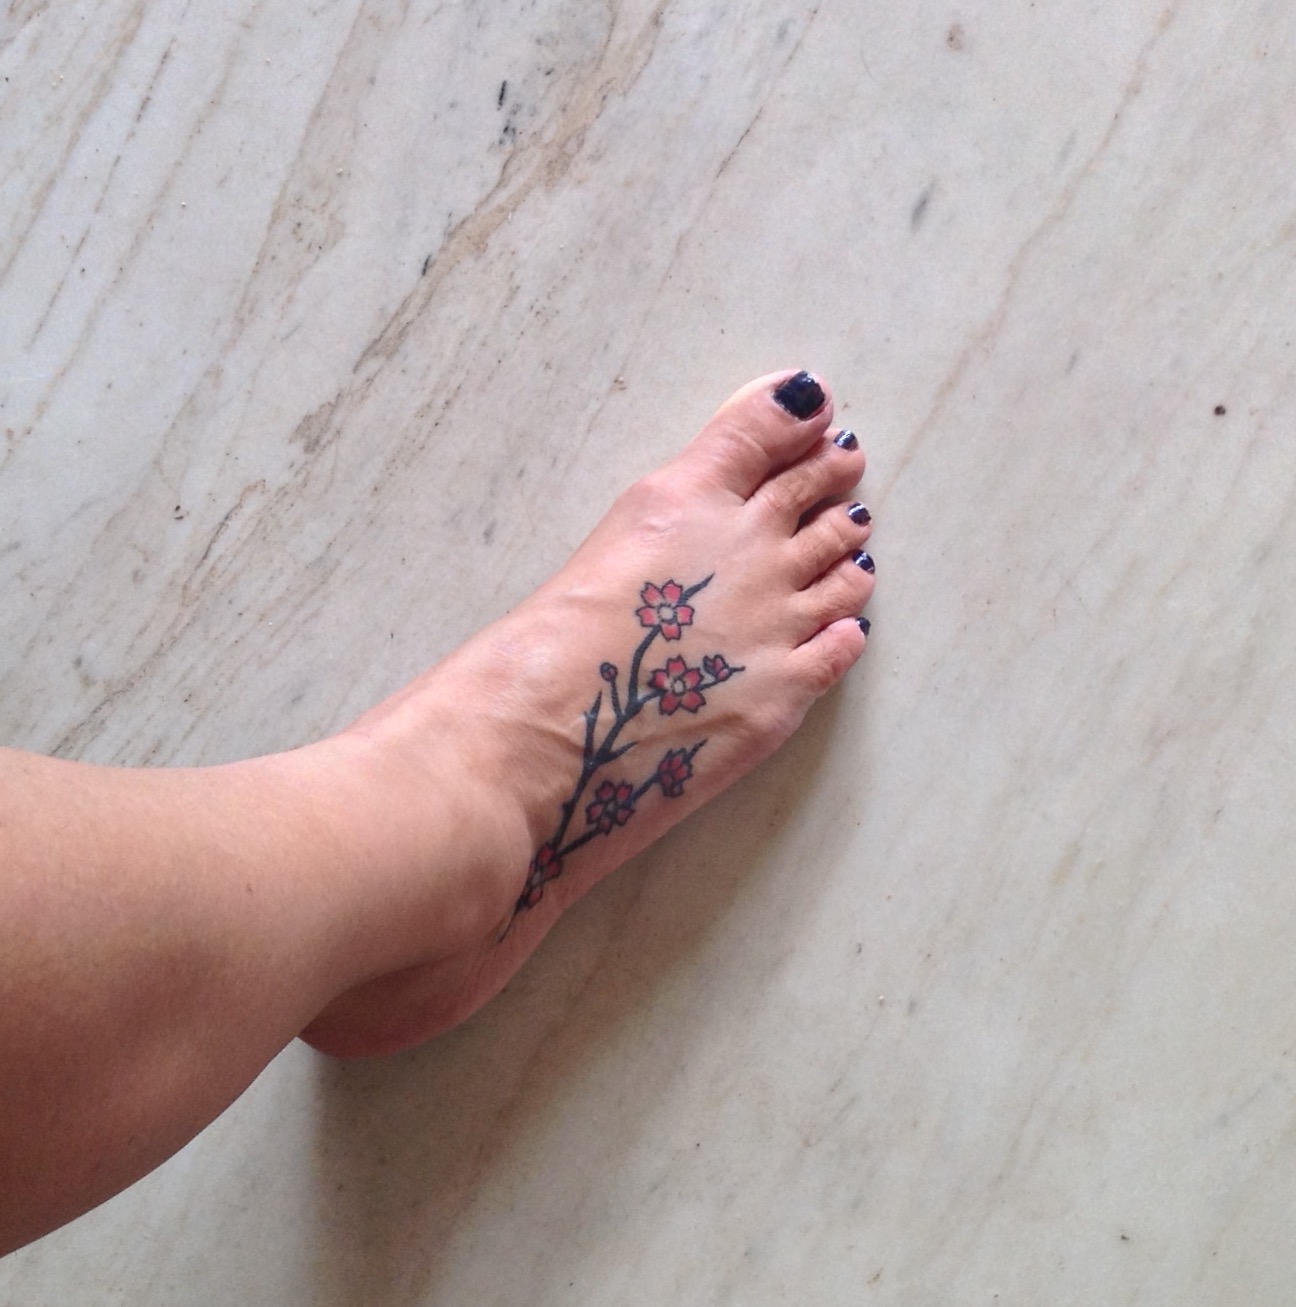 The 20 Least Painful Tattoos You'll Get - Cultura Colectiva